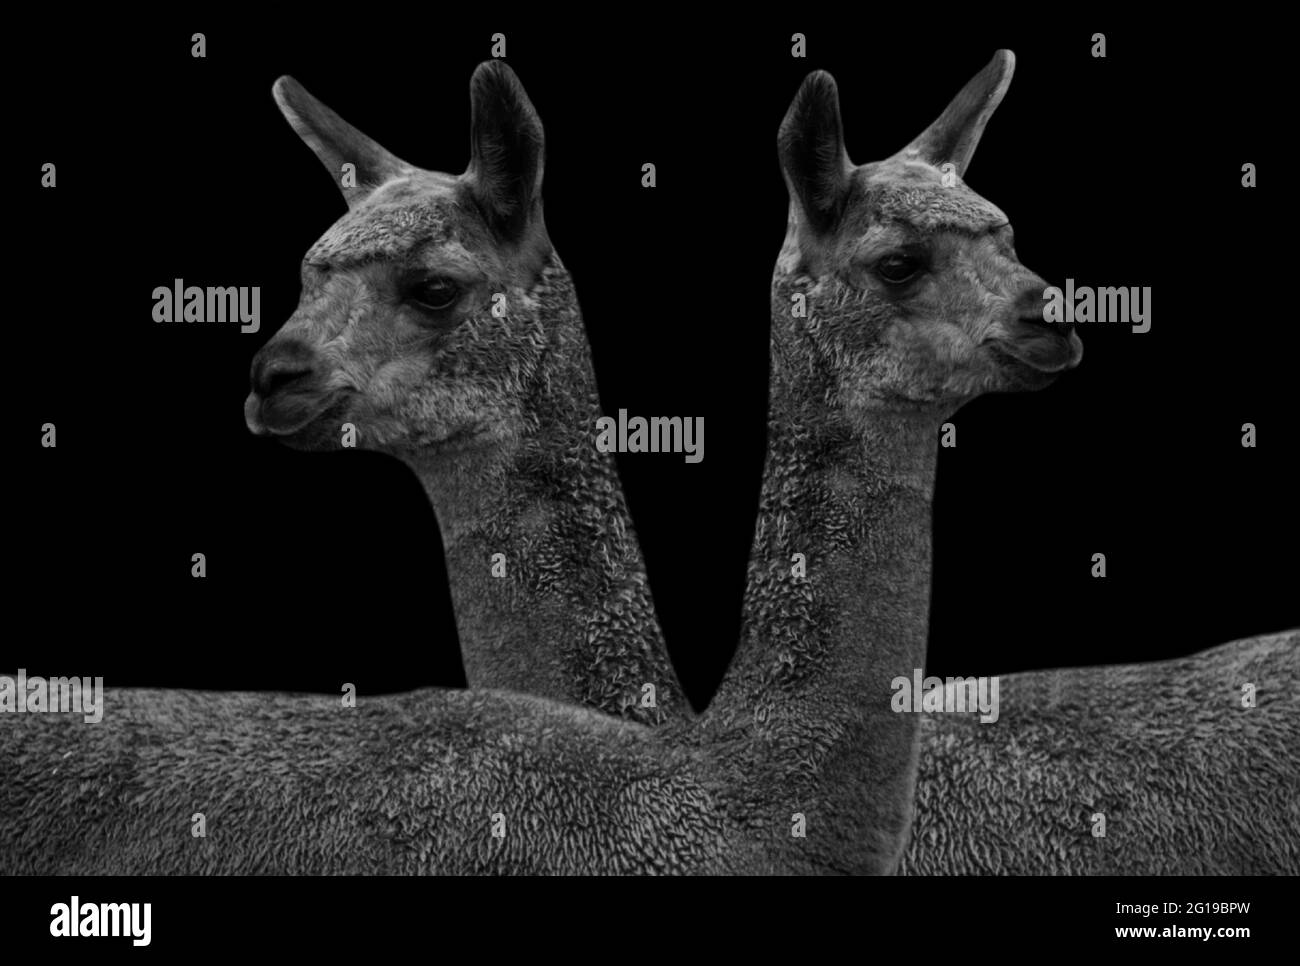 Two Black Alpaca Standing In The Black Background Stock Photo